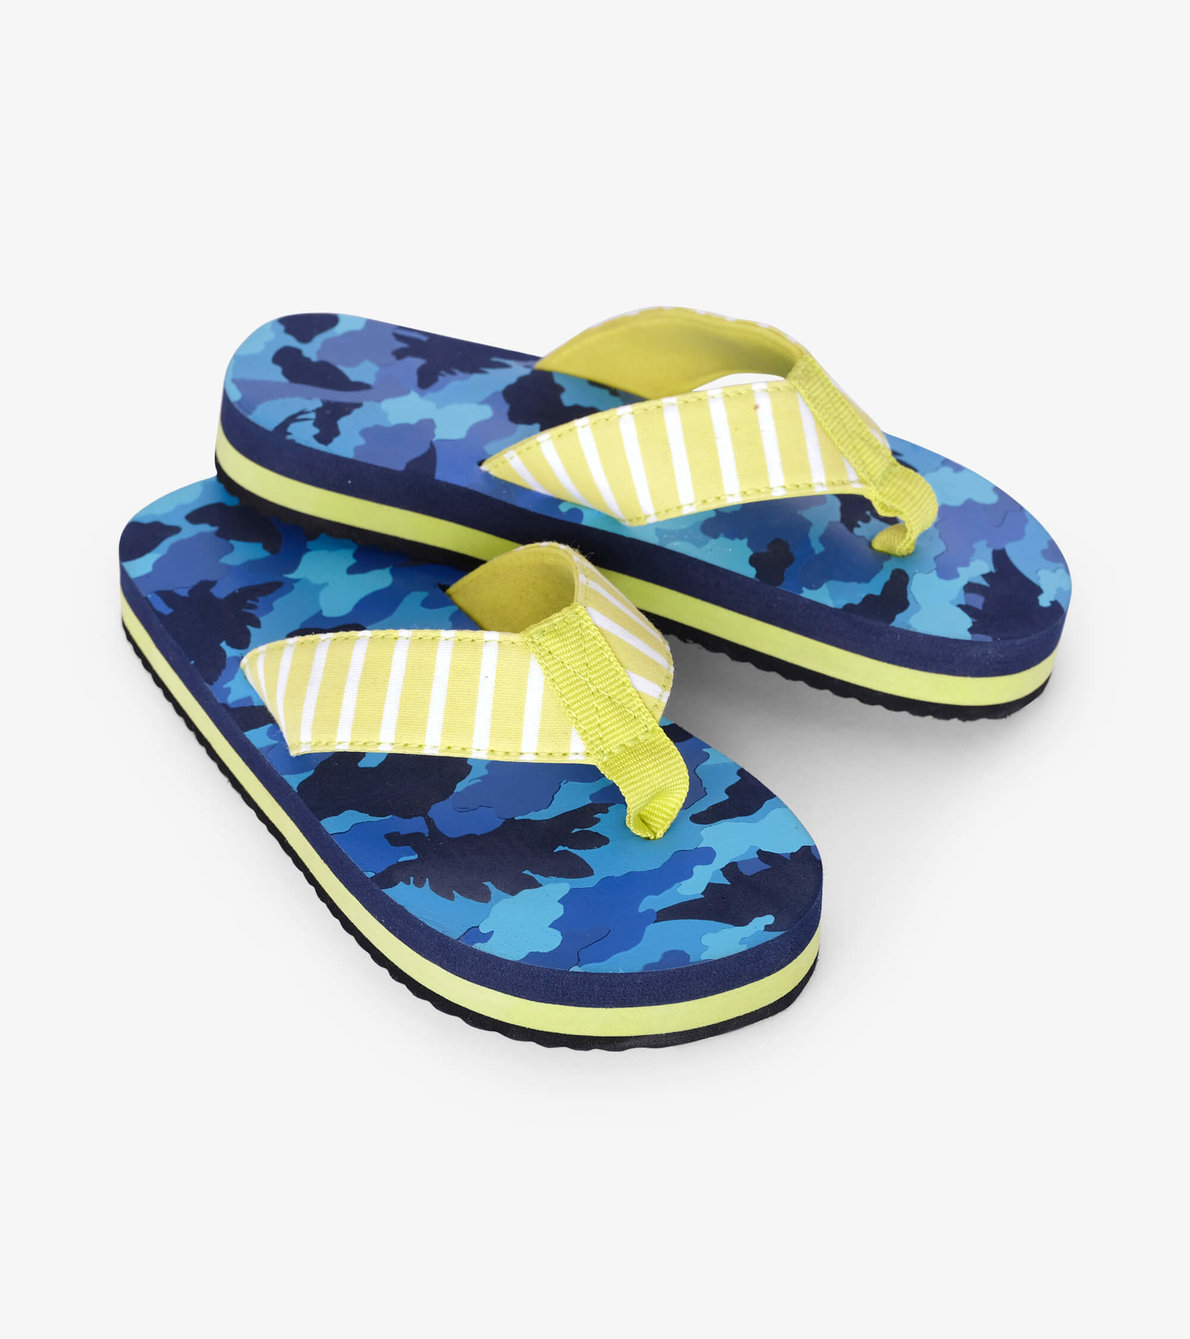 View larger image of Dino Camo Flip Flops